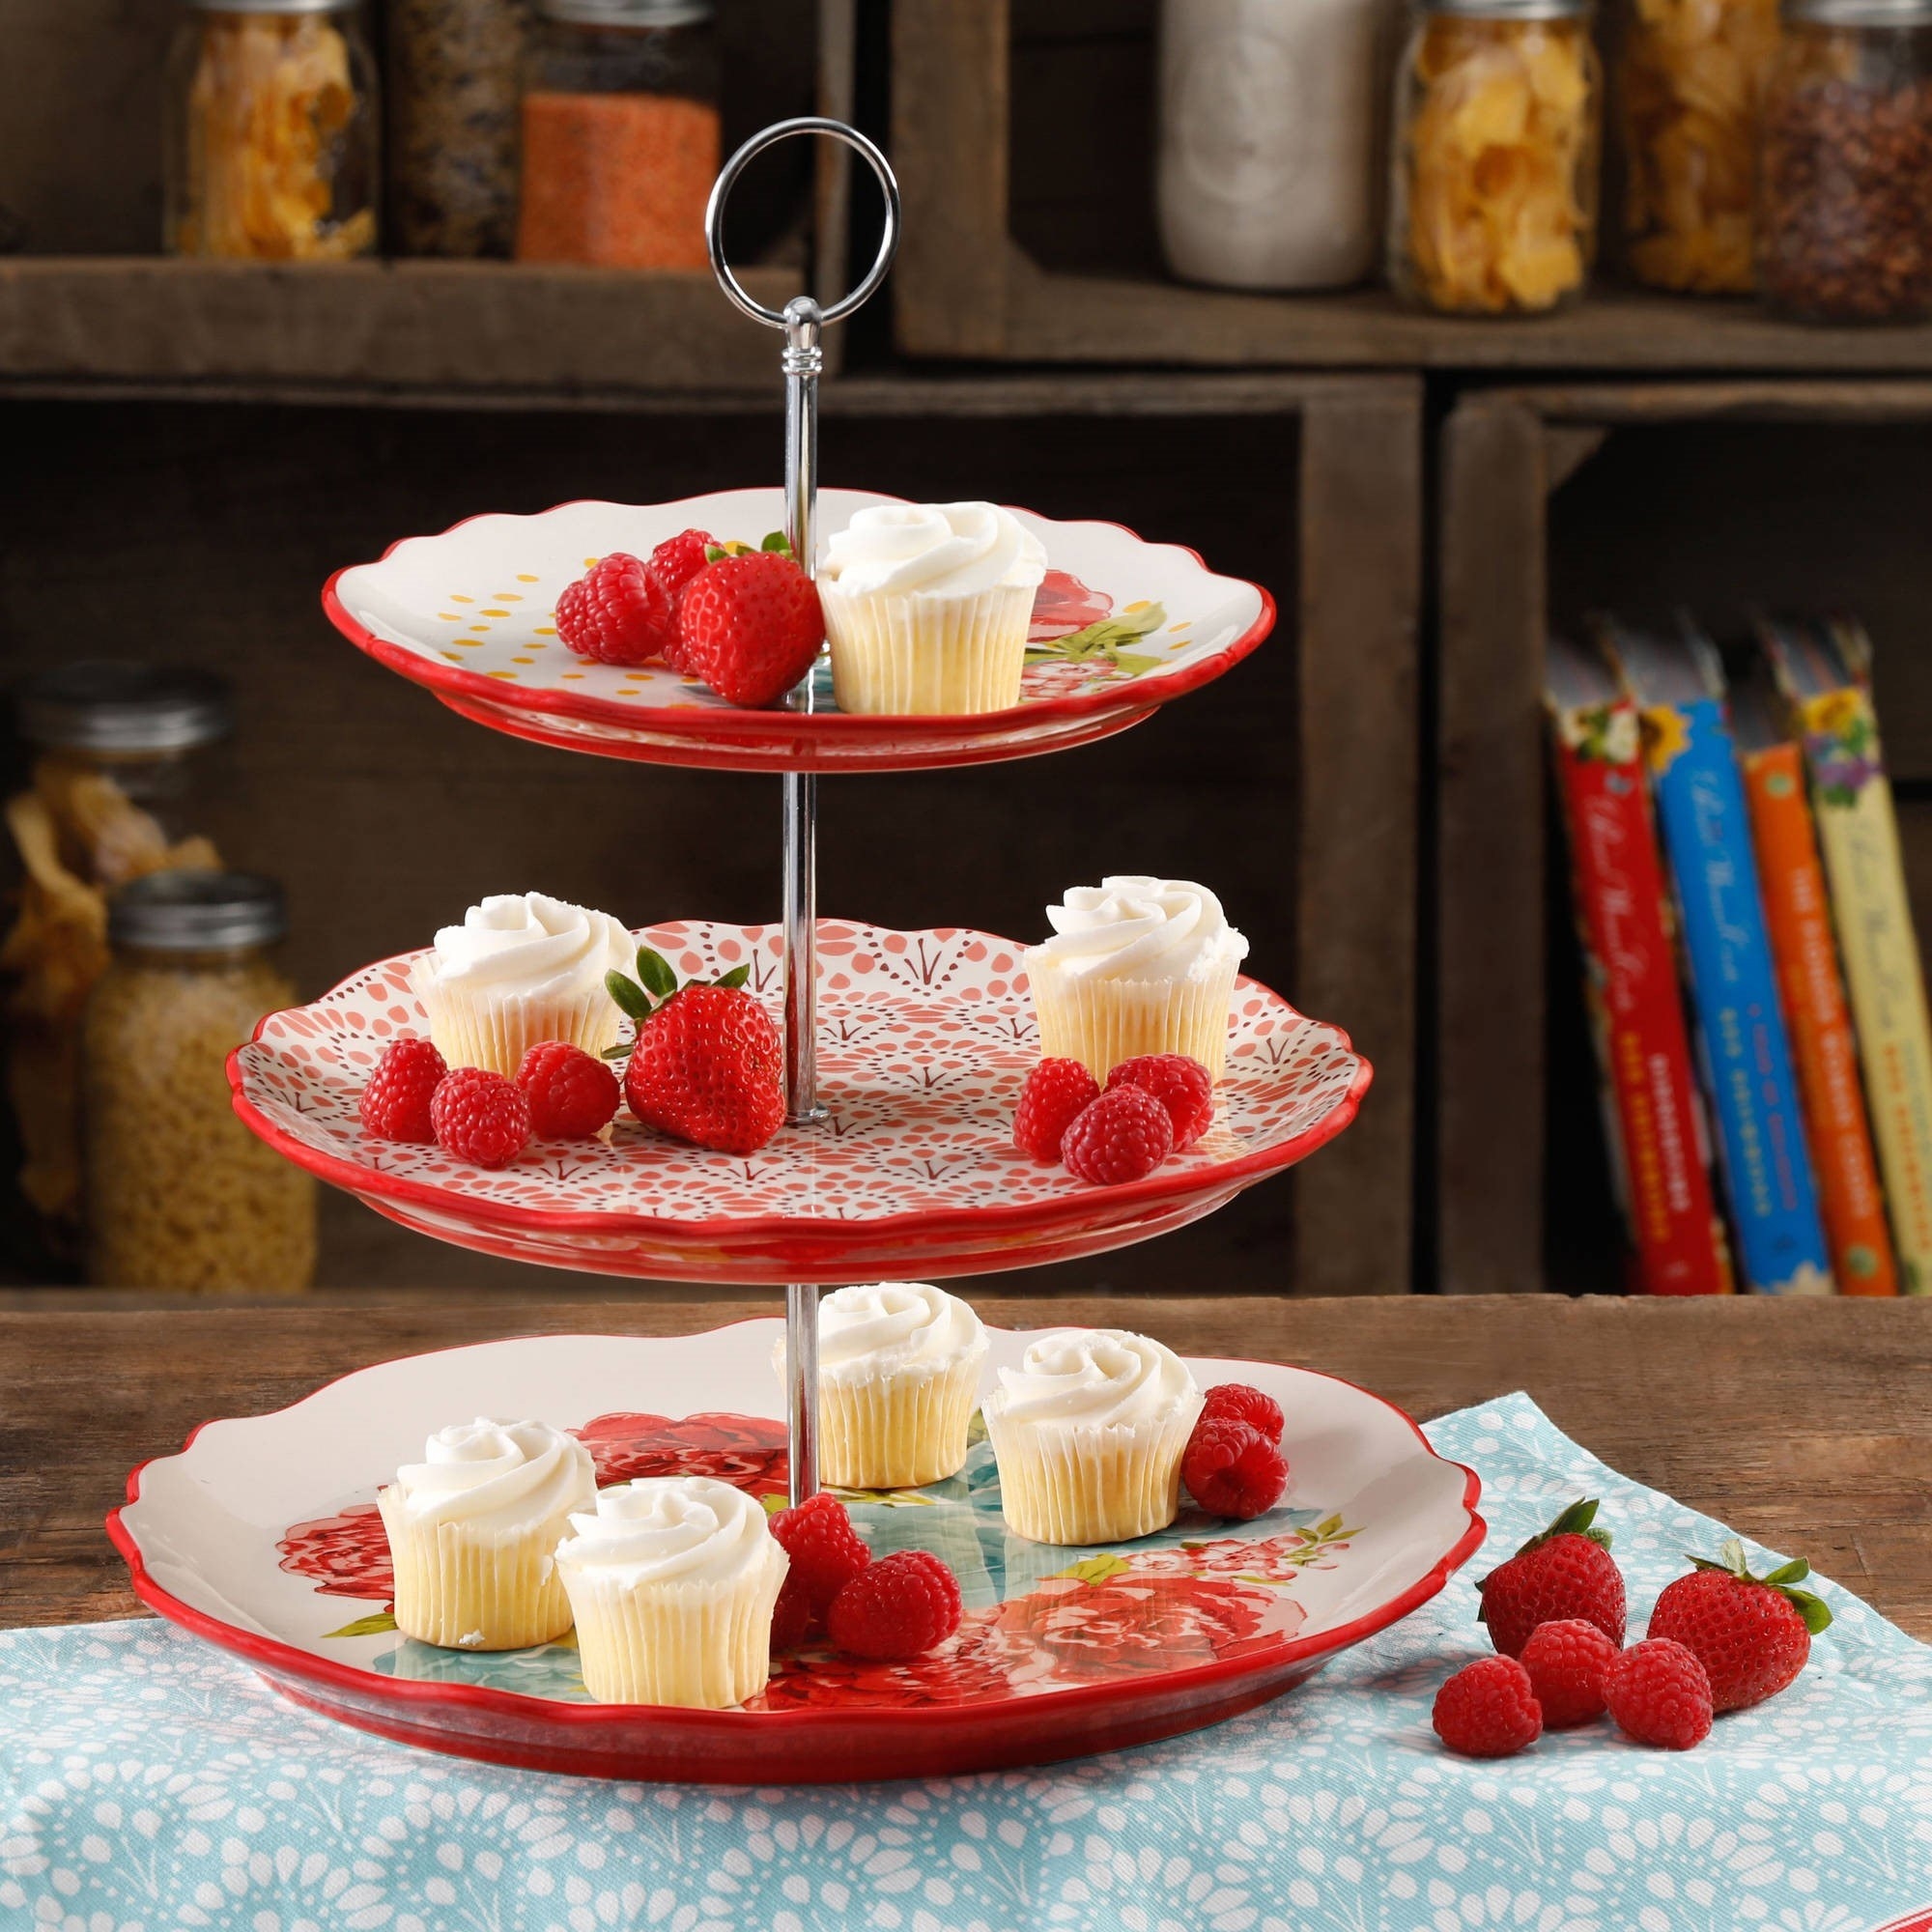 The red and white floral tiered serving tray 